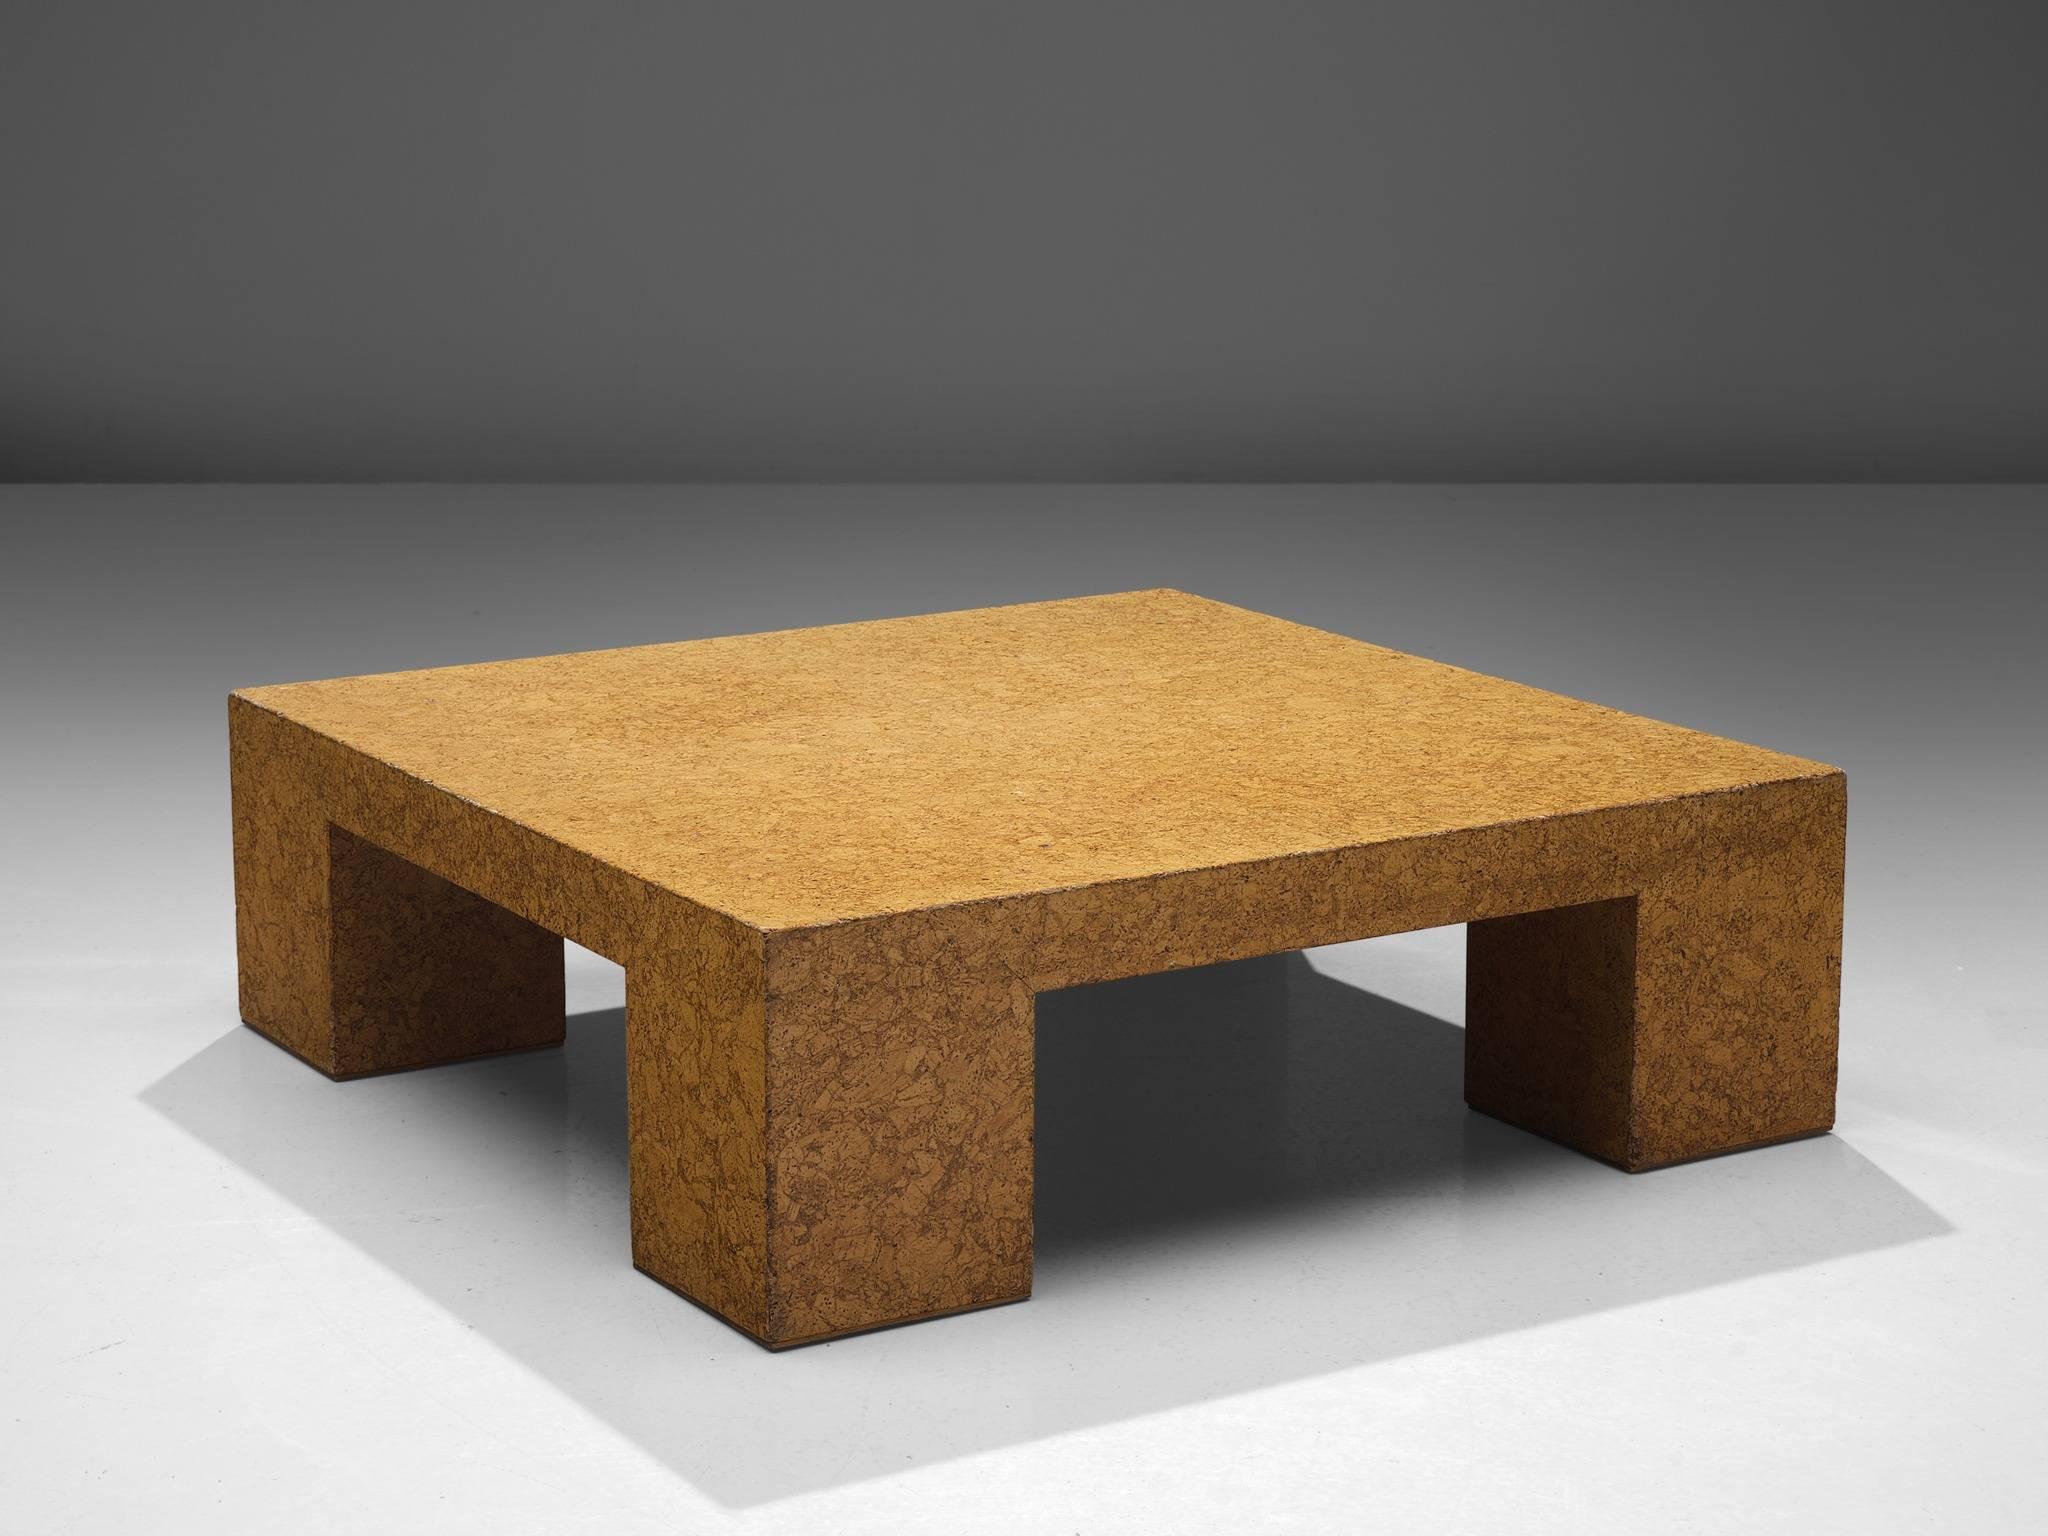 Jan de Smedt, cocktail table, corck, Belgium, circa 1970. Signed: Jan de Smedt (1929-1982)

This architectural table shows balanced proportions and executed in a warm, honey colored patinated cork. It is in the proportions that this table shows a